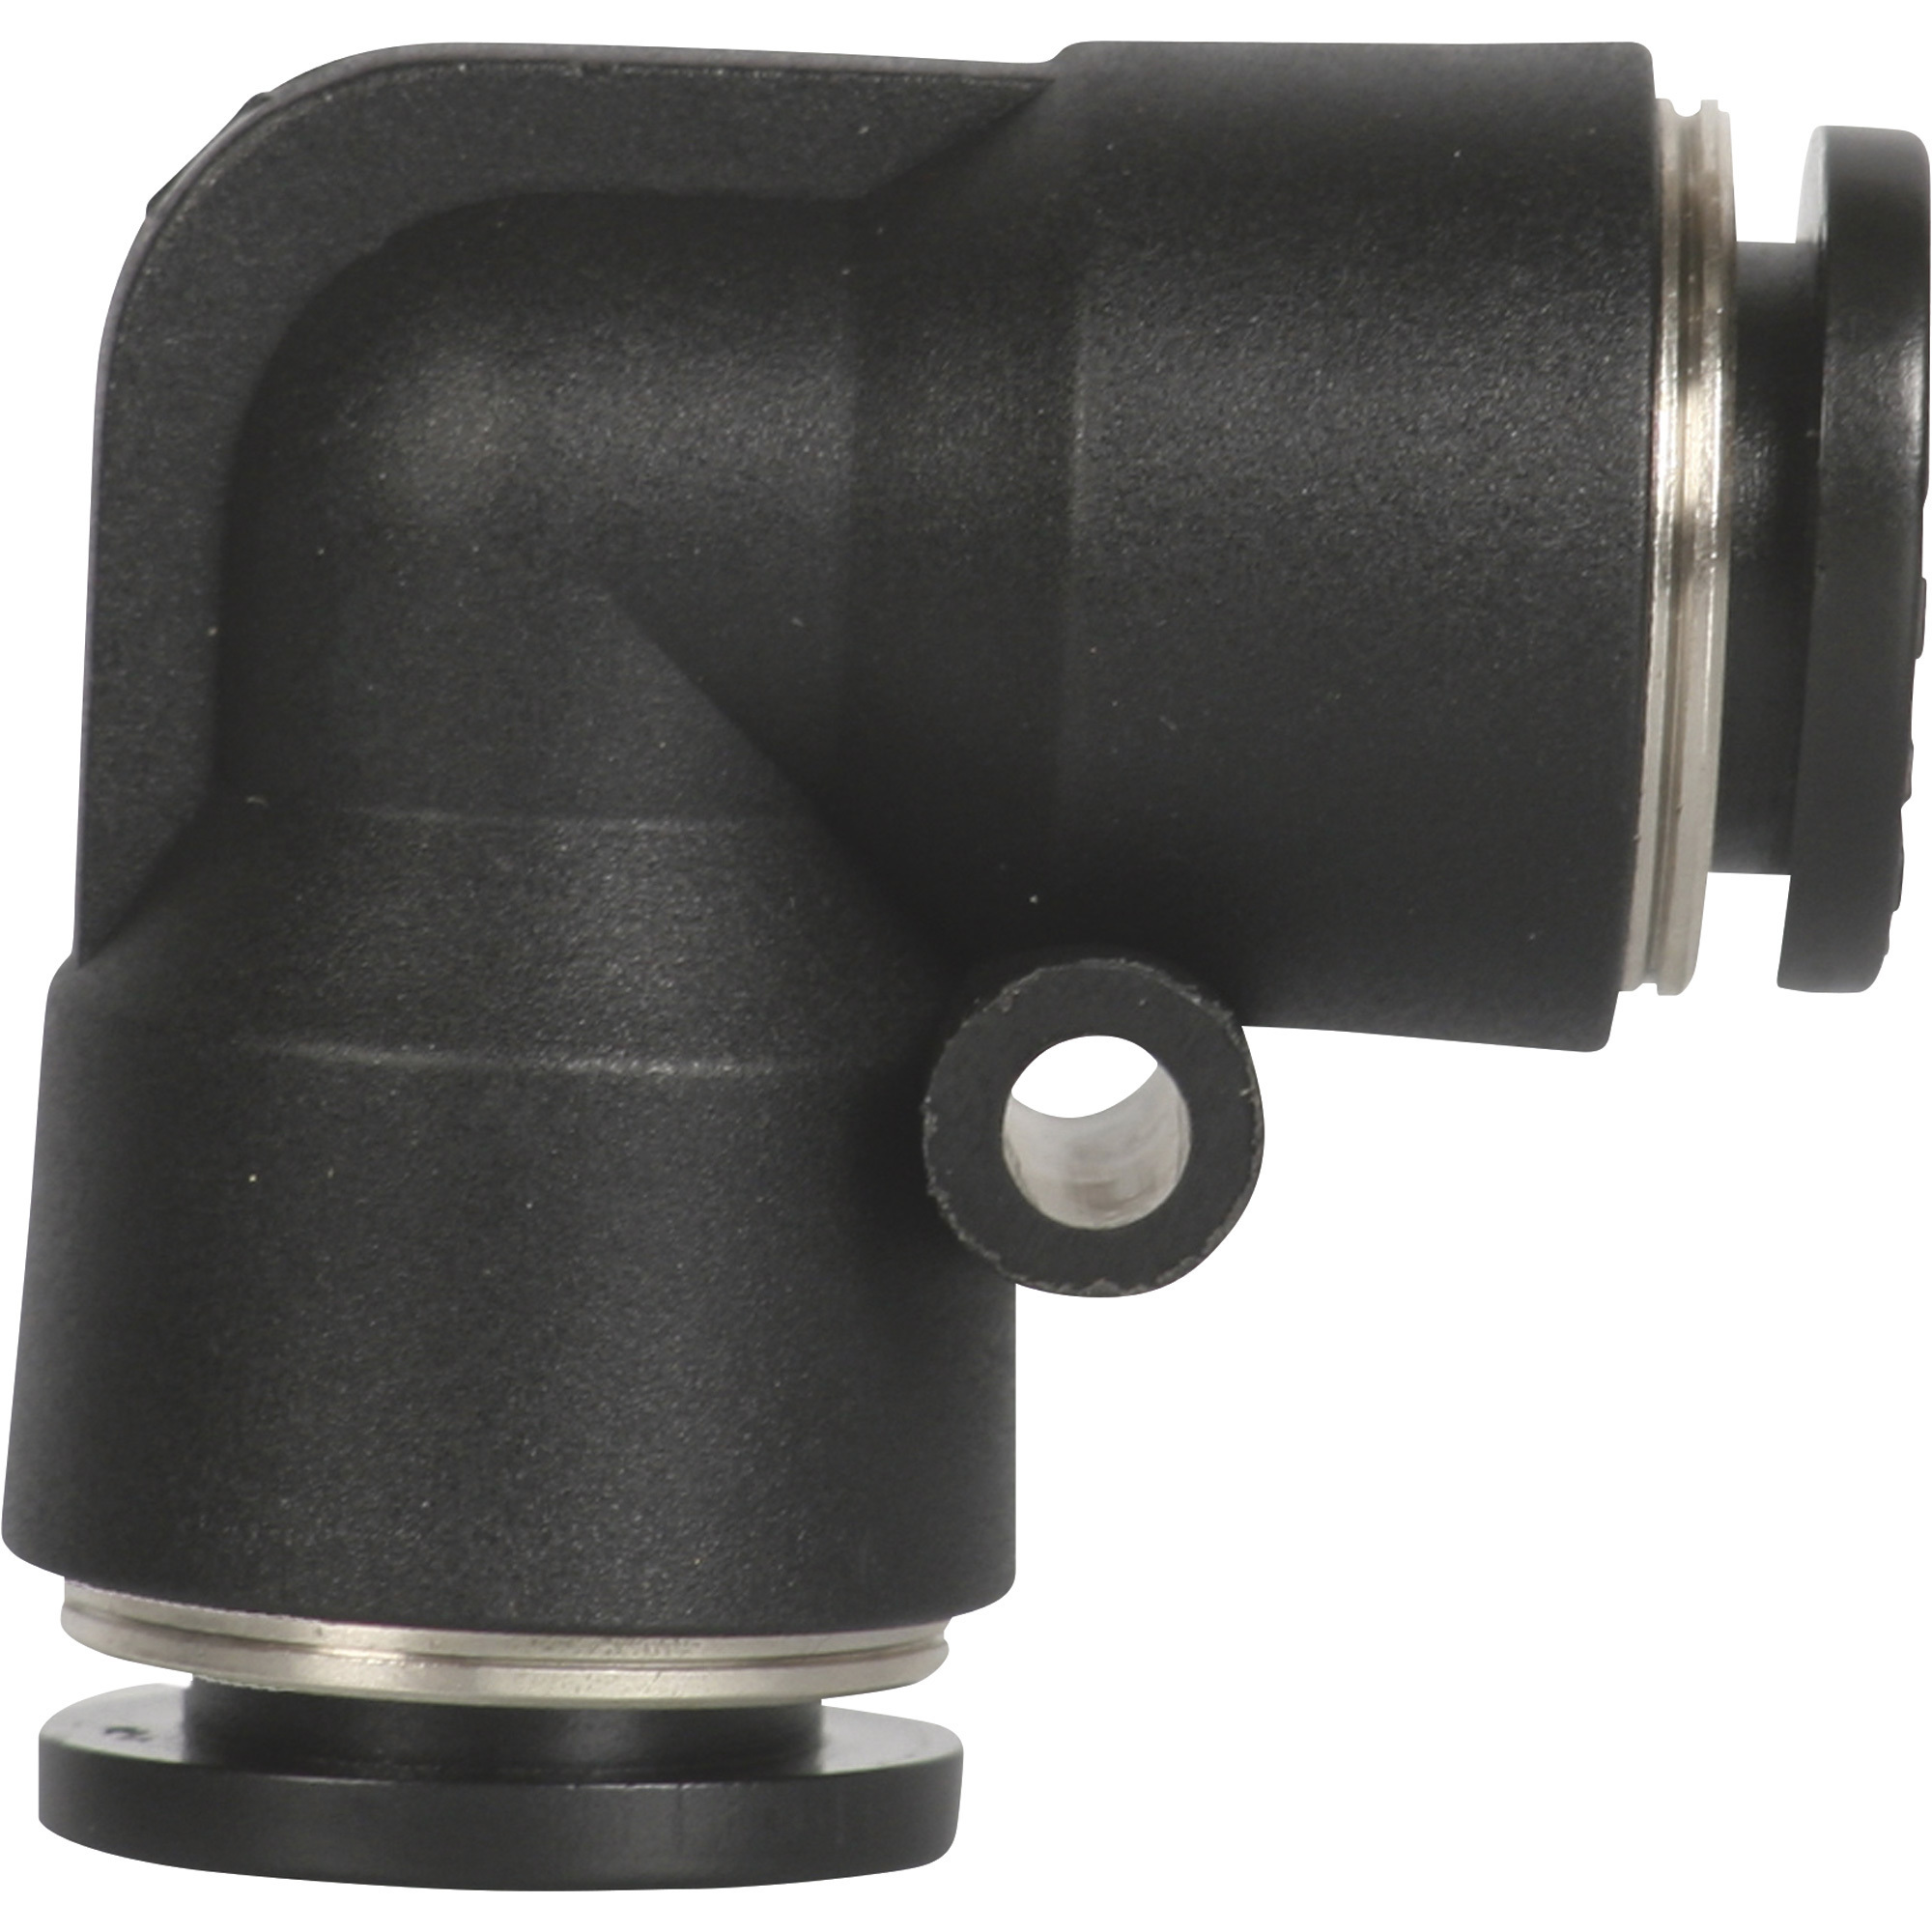 RapidAir Union Elbow Fitting — 1/2in., Model# 50300